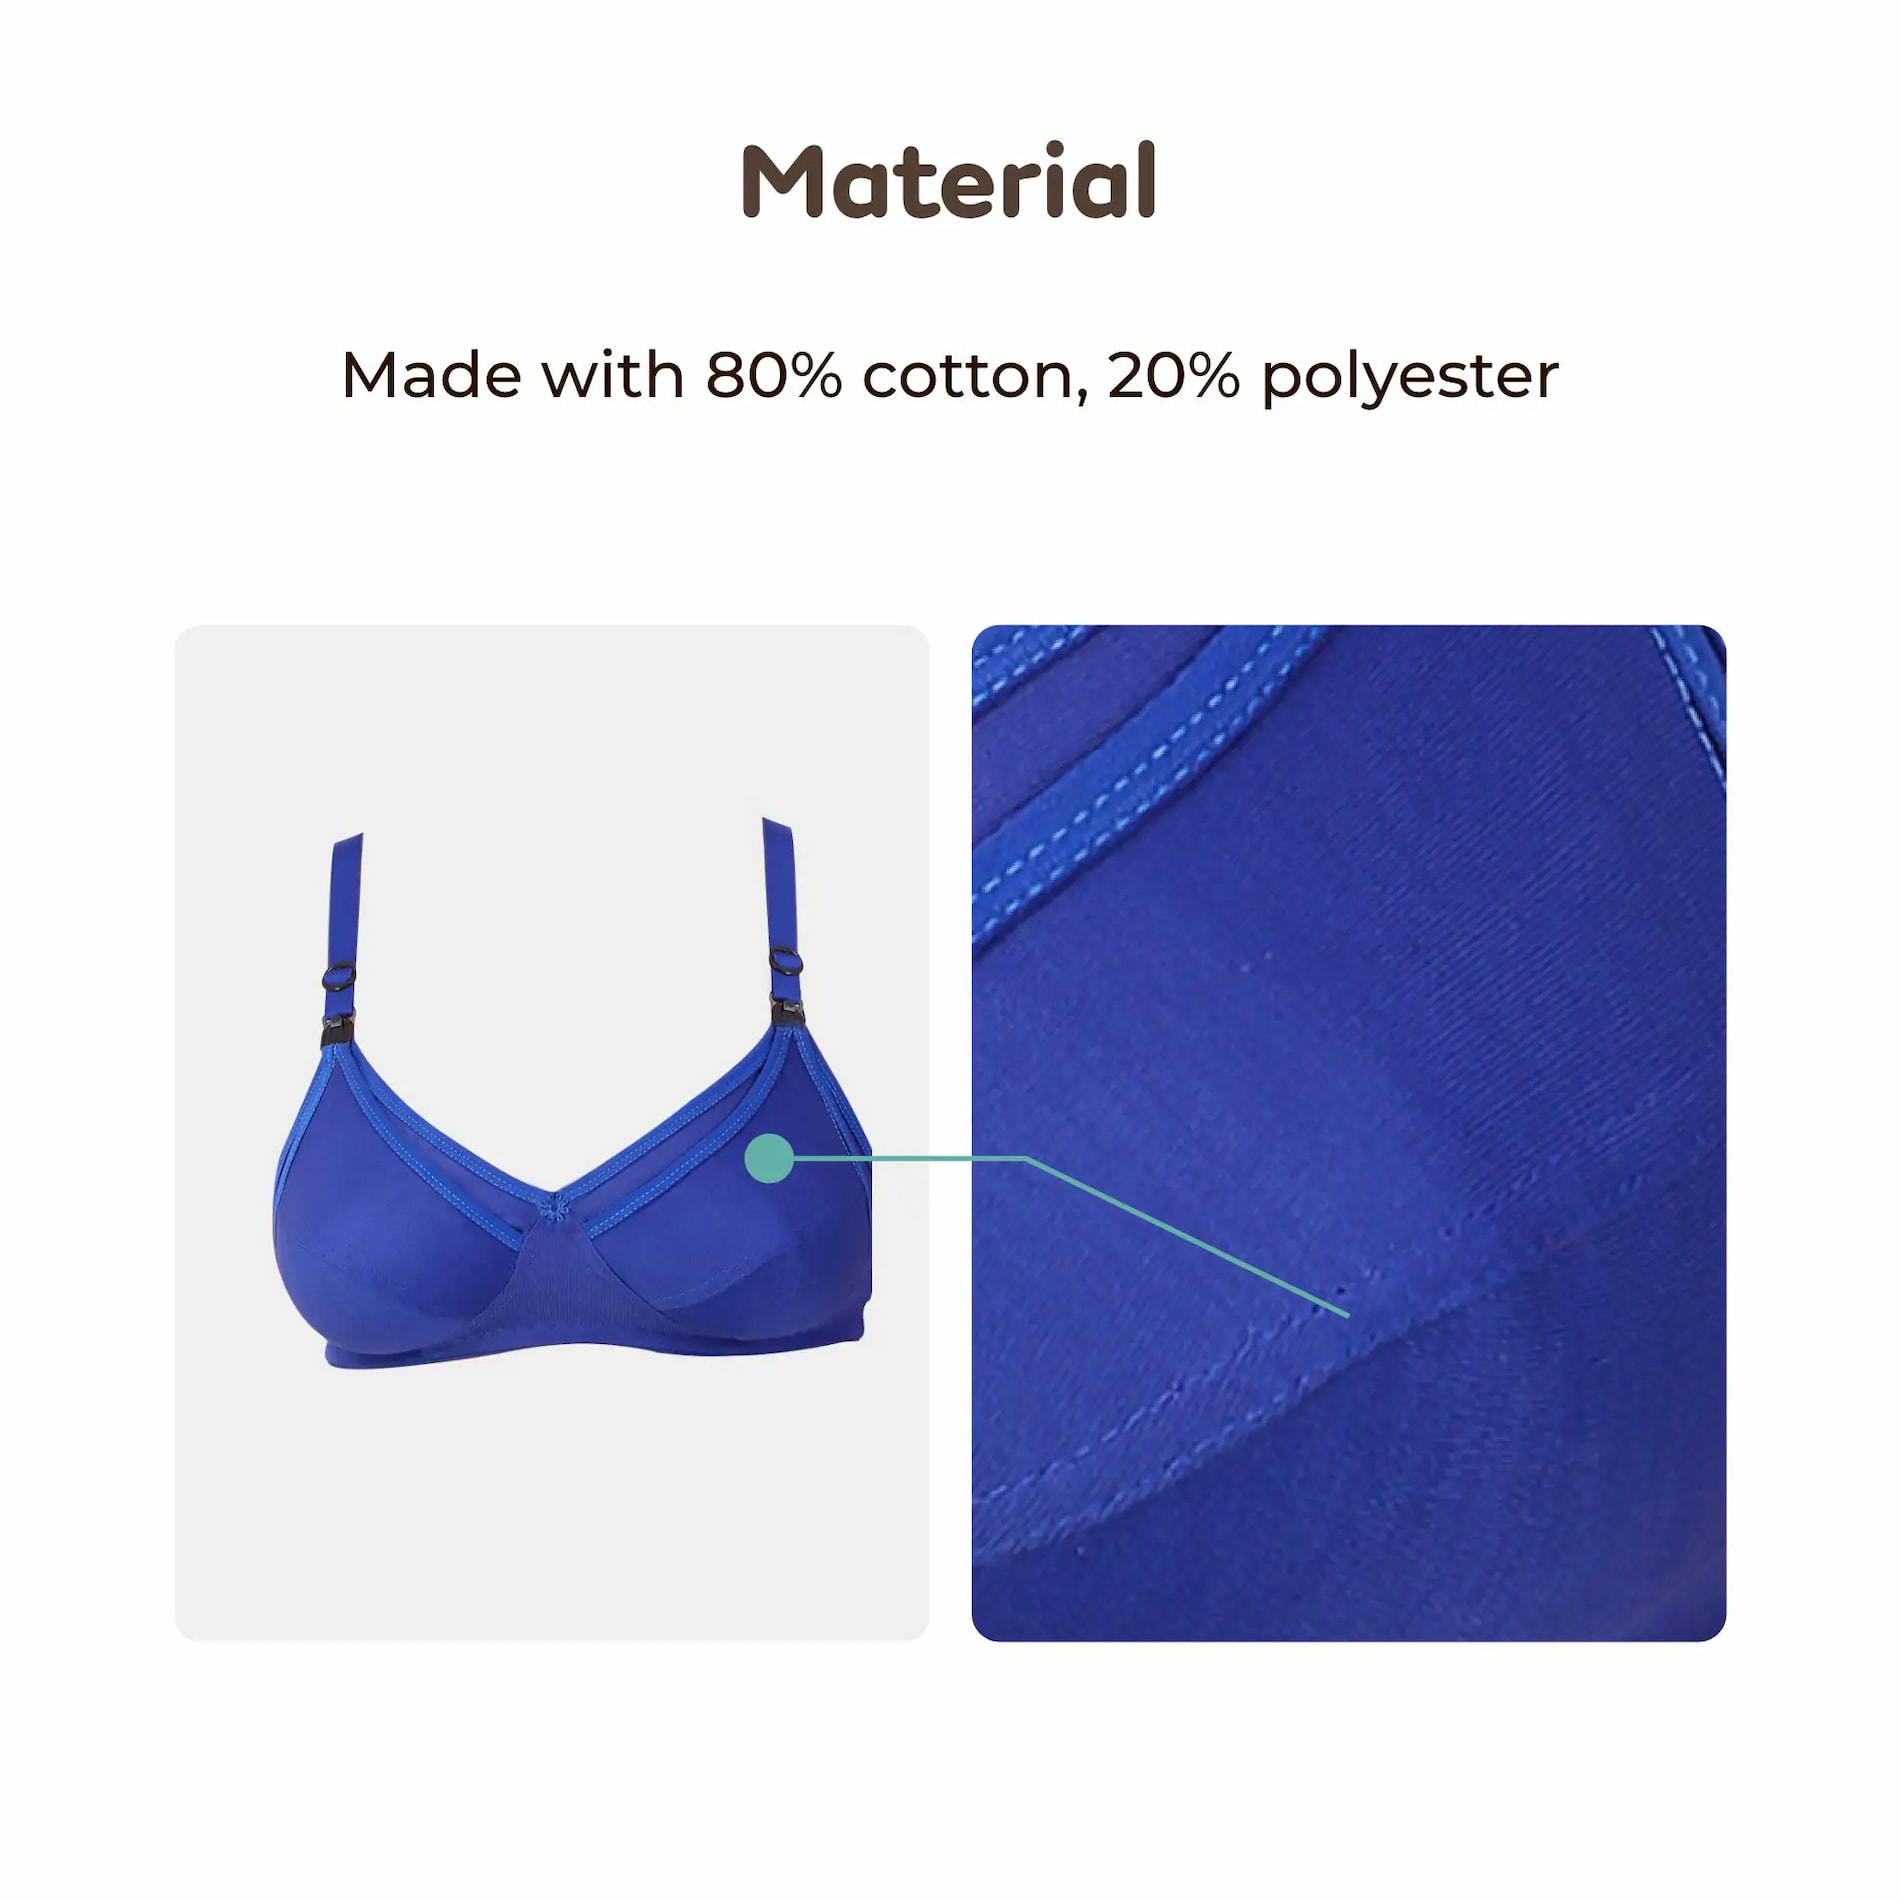 Maternity/Nursing Bras Non-Wired, Non-Padded with free Bra Extender - Persian Blue 40 B 